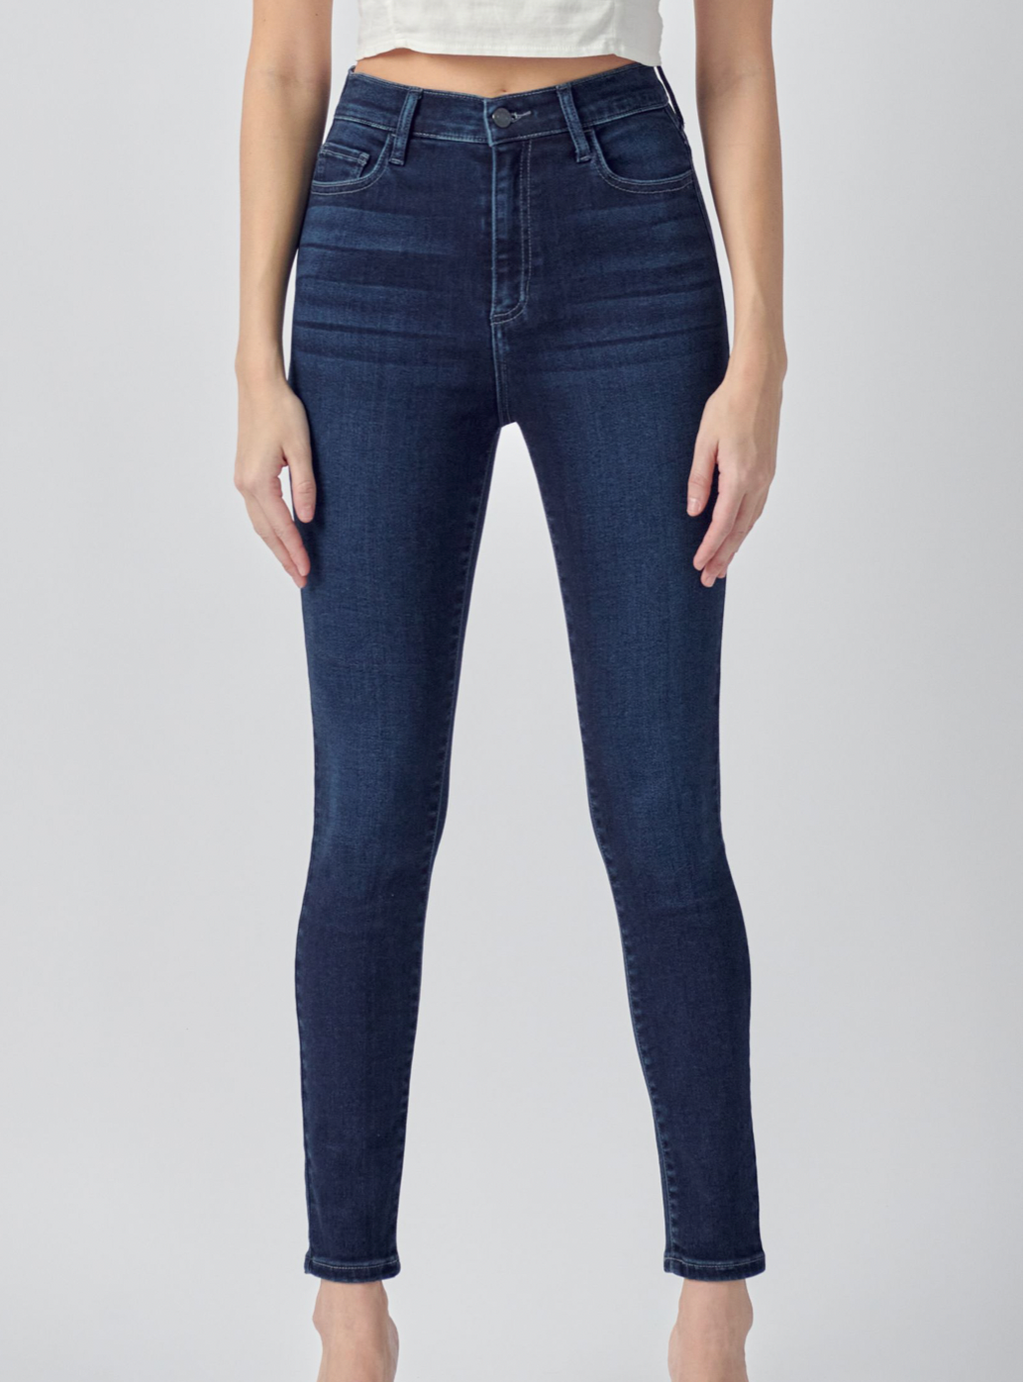 Our signature skinny jeans reengineered for those with an hourglass shape. The result? A narrower waist with a contoured band, a longer rise ( for a rounder booty), and a little extra room at the hips and thighs. Additionally equipped with five pockets, belt loops and a zip fly closure.      Import  Inseam: 28” Rise: 11”  Fabric Content: 57.1% Cotton 35.4% Modal 6.4% Polyester 1.1% Lycra